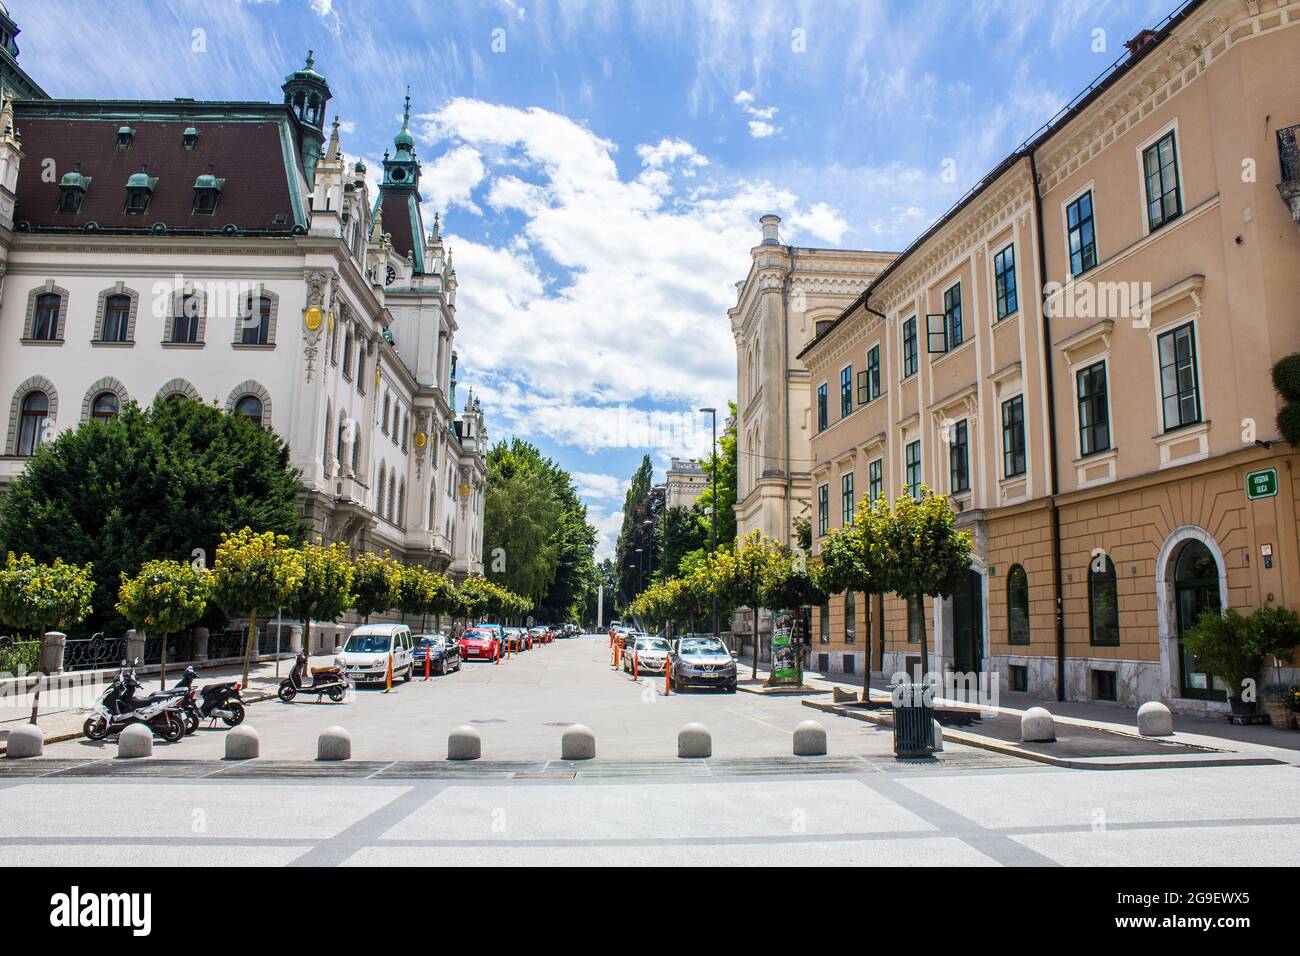 Ljubljana, Slovenia - July 15, 2017: View of the University Building in Congress Square on a Sunny Day Stock Photo